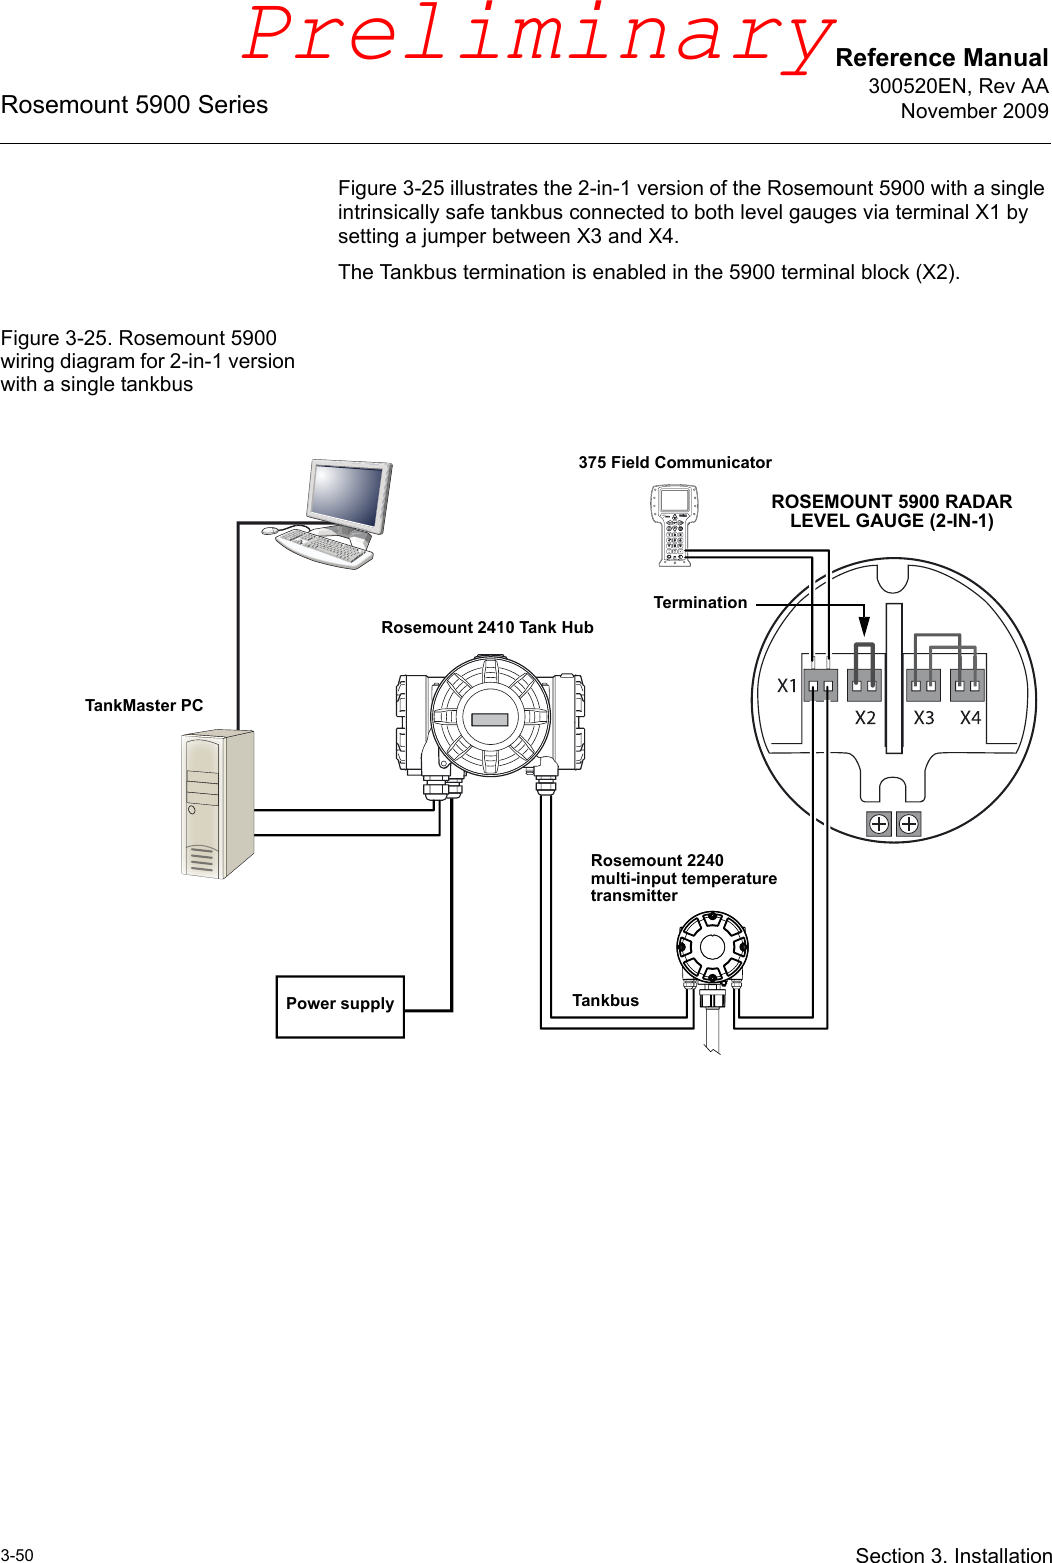 Reference Manual300520EN, Rev AANovember 2009Rosemount 5900 Series3-50 Section 3. InstallationFigure 3-25 illustrates the 2-in-1 version of the Rosemount 5900 with a single intrinsically safe tankbus connected to both level gauges via terminal X1 by setting a jumper between X3 and X4. The Tankbus termination is enabled in the 5900 terminal block (X2).Figure 3-25. Rosemount 5900 wiring diagram for 2-in-1 version with a single tankbus TankMaster PCTankbusRosemount 2240 multi-input temperature transmitterRosemount 2410 Tank HubPower supply375 Field CommunicatorROSEMOUNT 5900 RADAR LEVEL GAUGE (2-IN-1)TerminationPreliminary